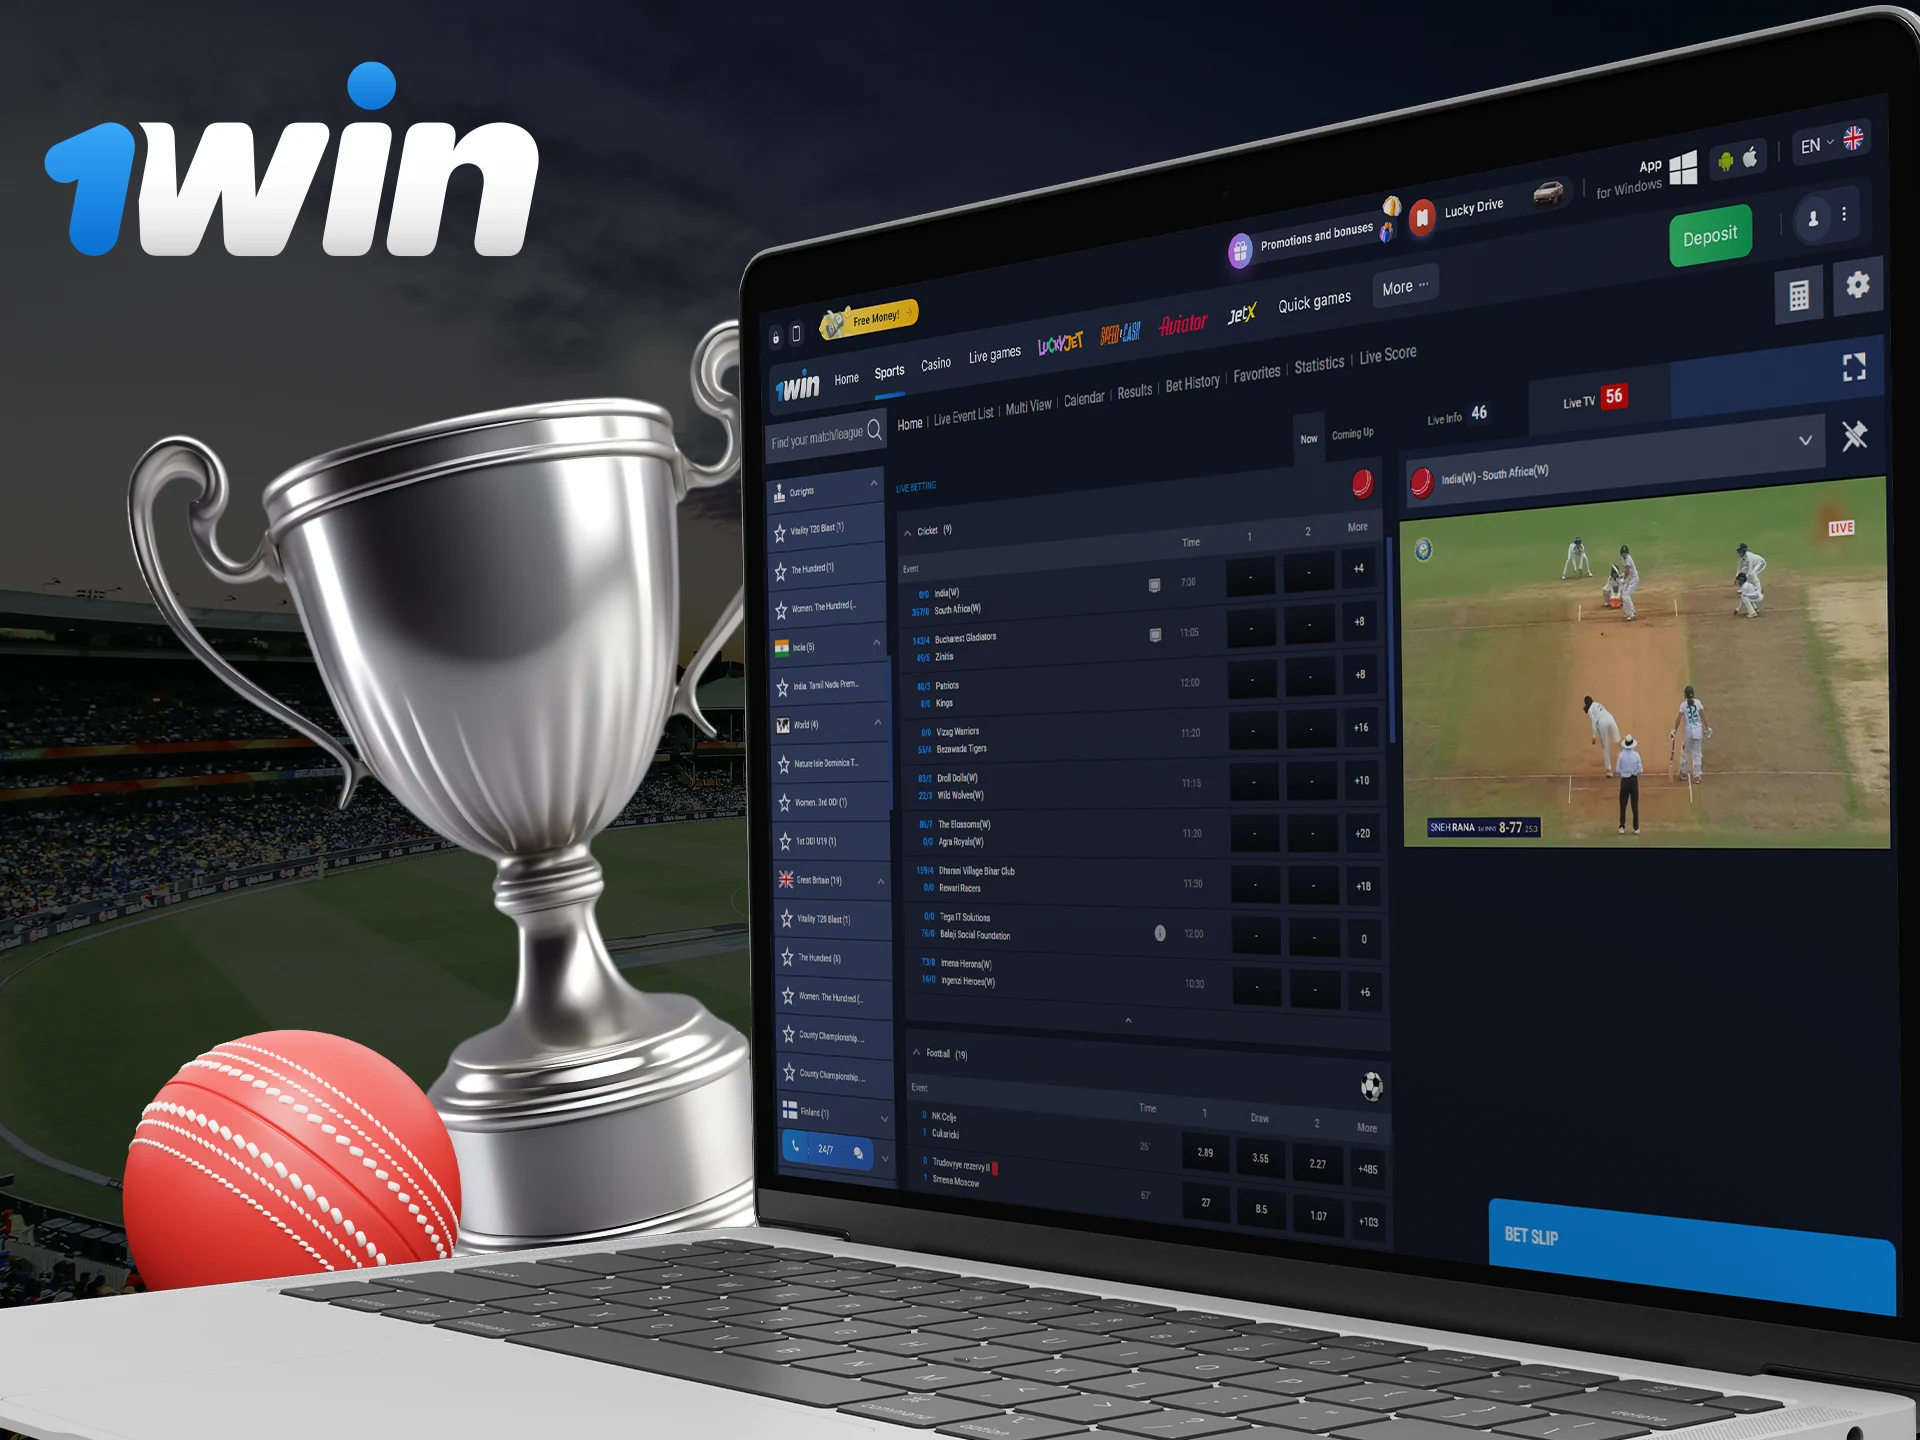 For cricket fans, all popular cricket tournaments are available for betting at 1Win.